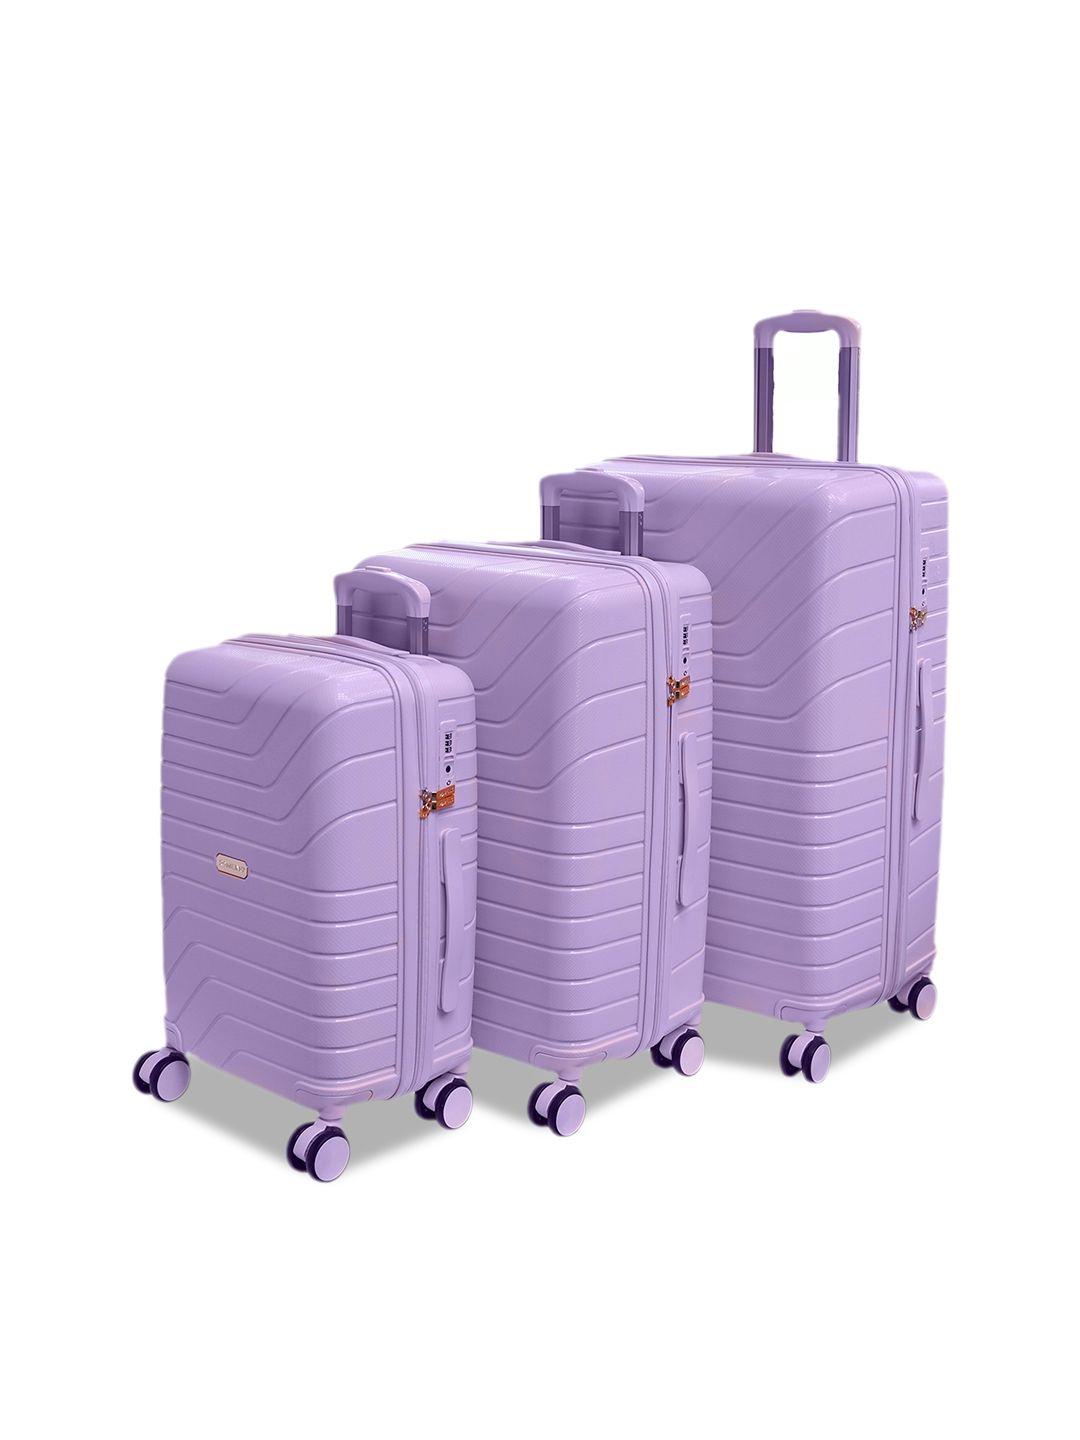 romeing tuscany set of 3 tuscany textured hard trolley suitcases